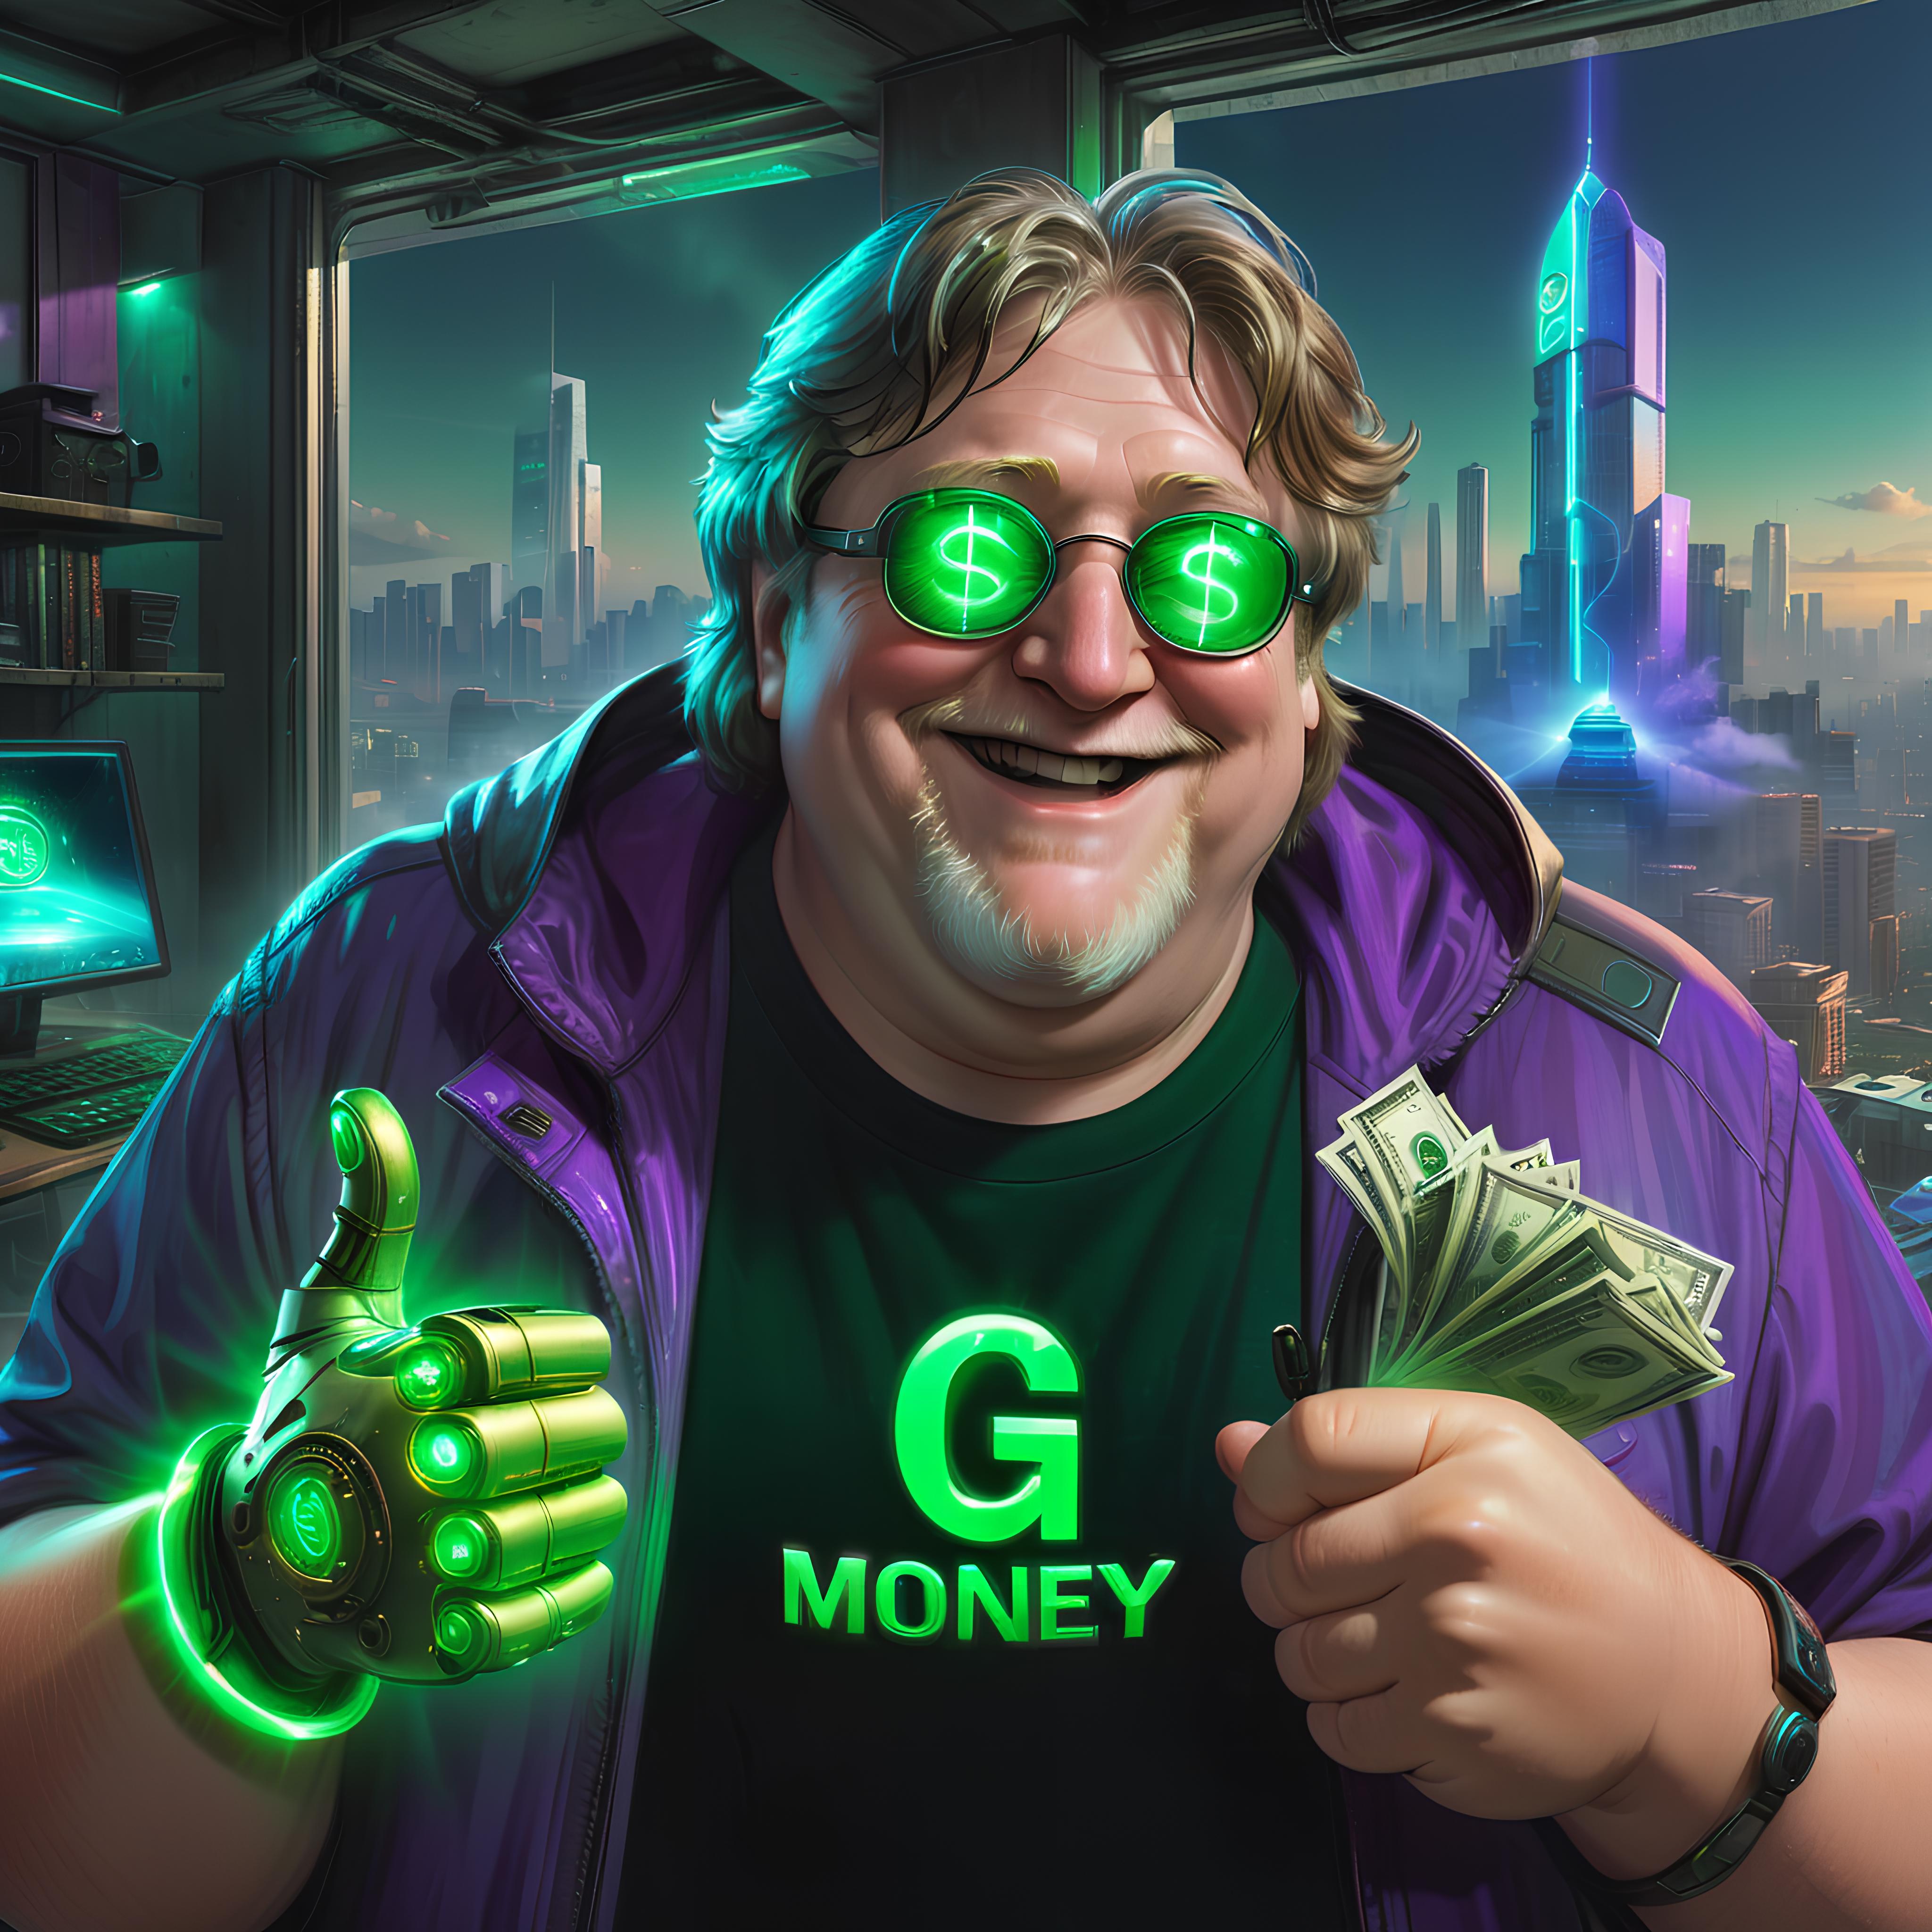 A cartoon character wearing a green shirt and sunglasses, holding money and giving a thumbs up.